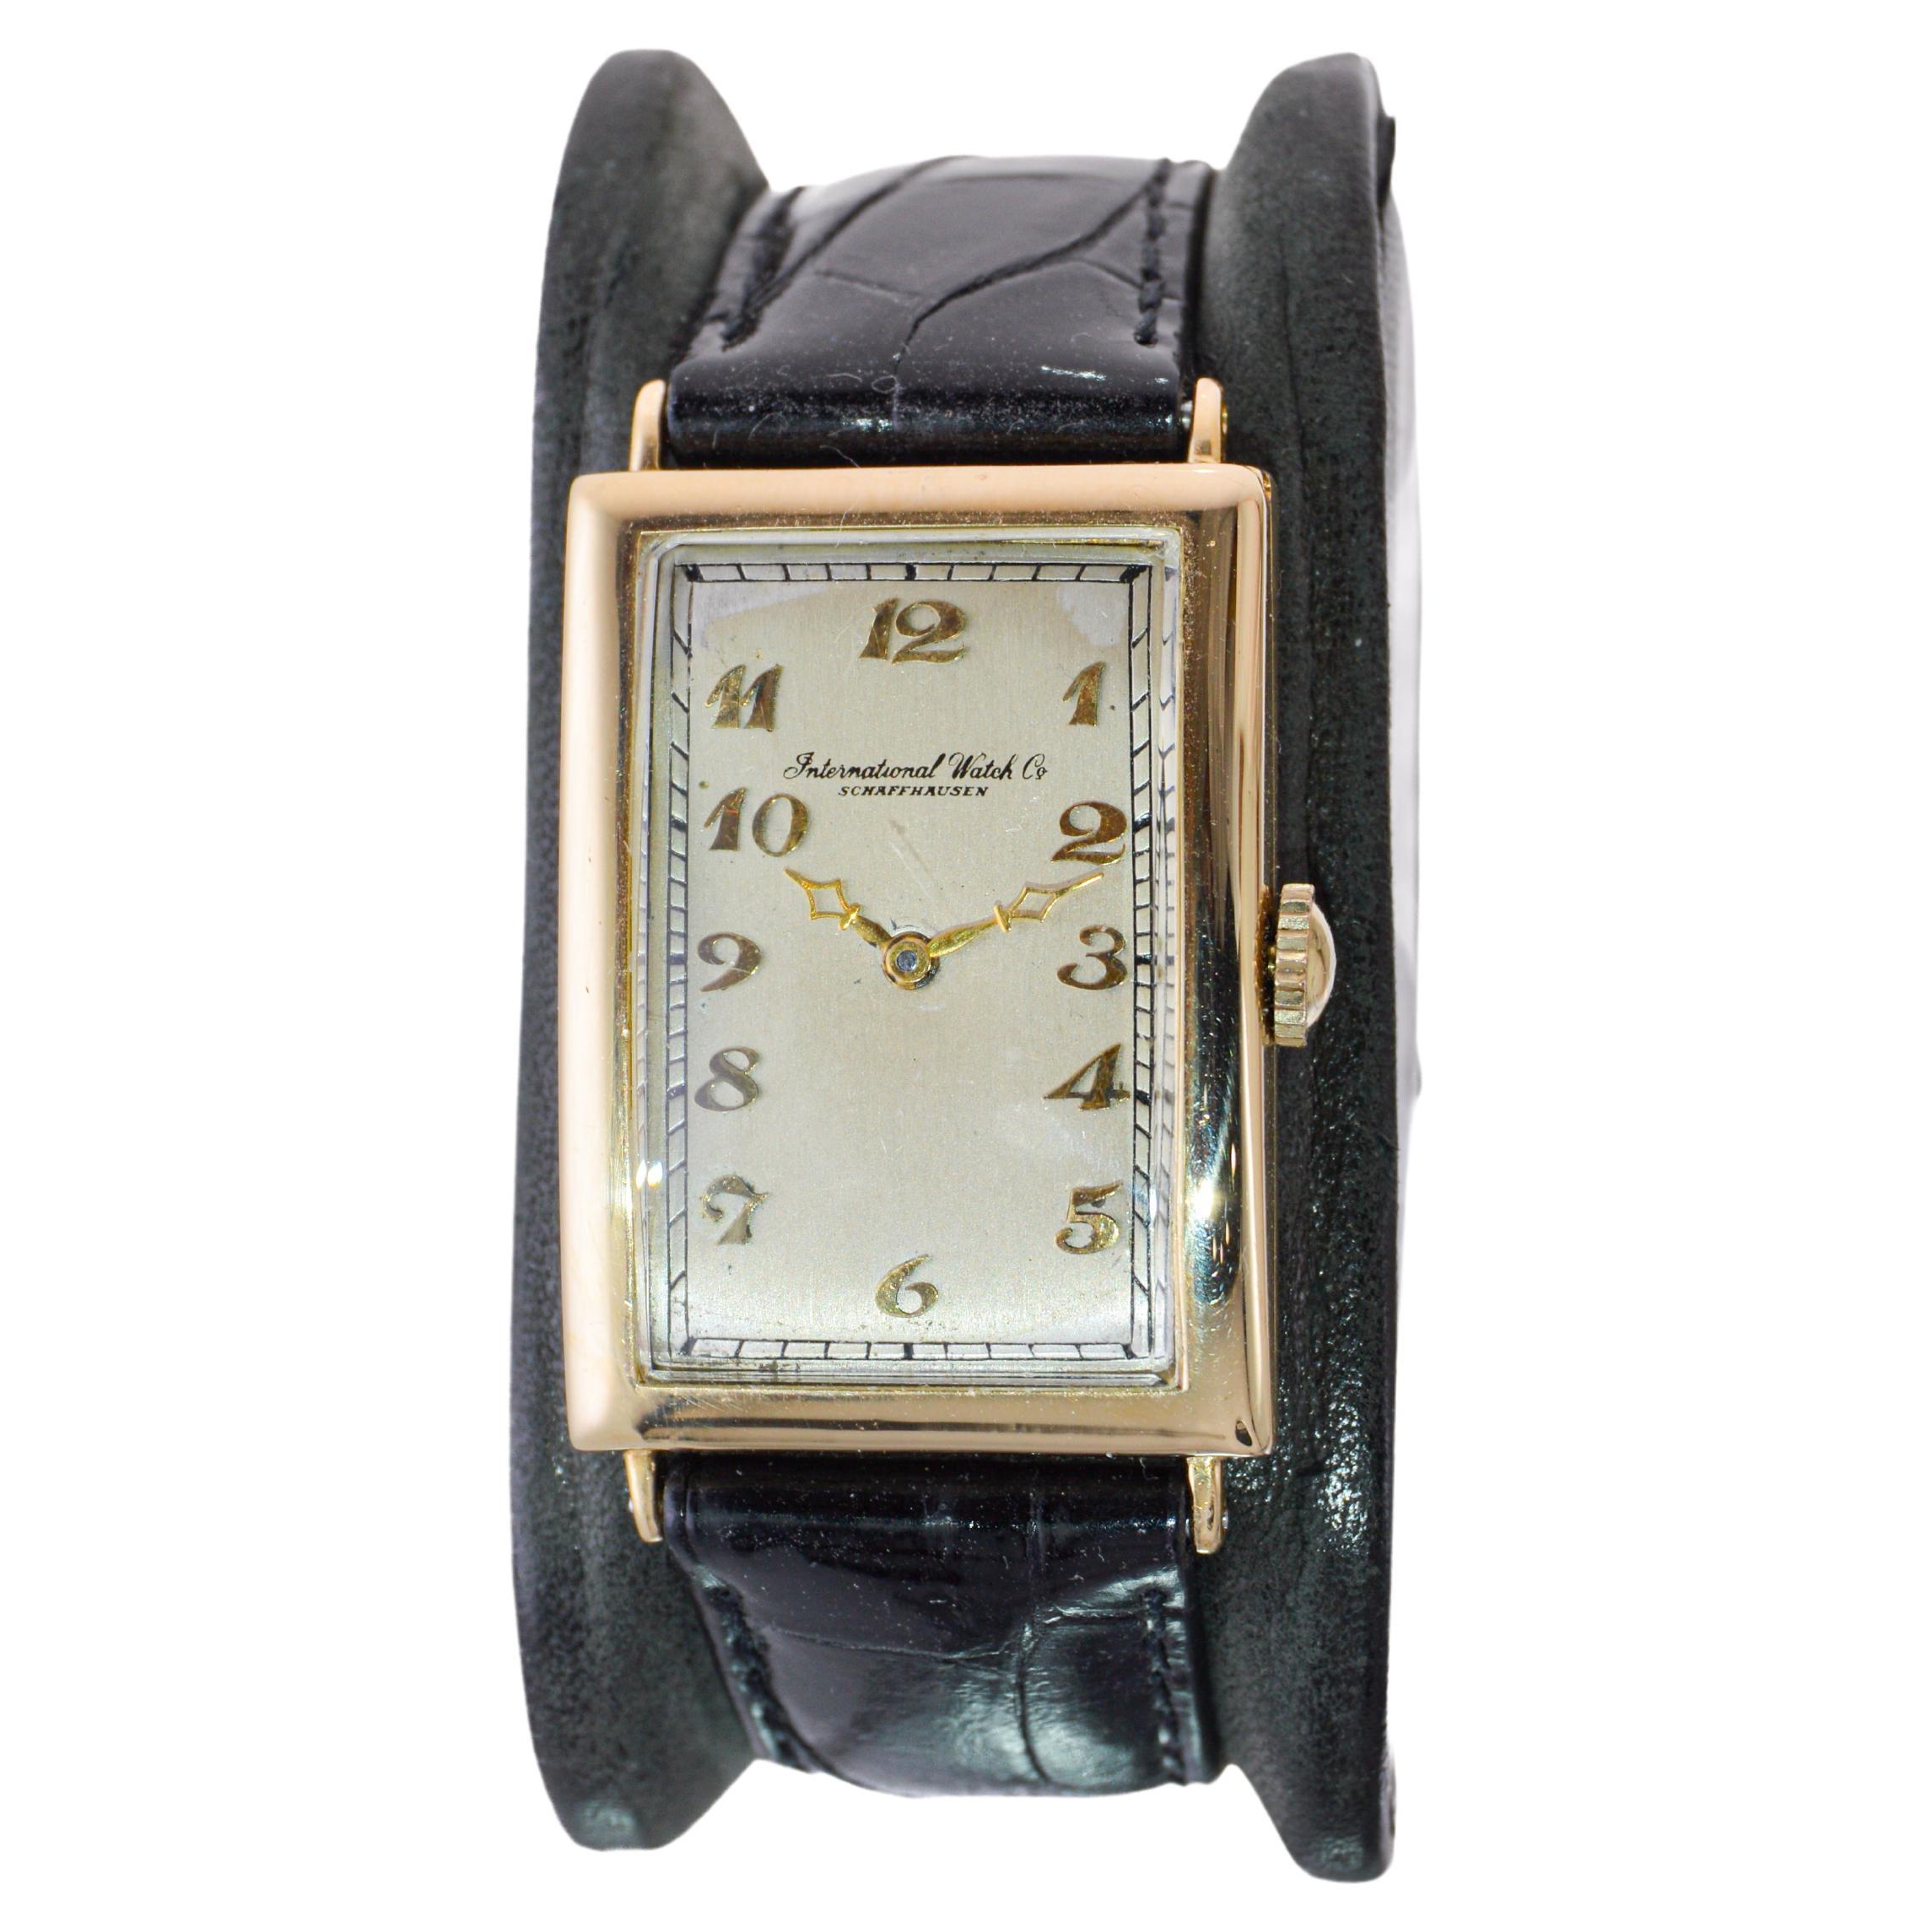 FACTORY / HOUSE:  I.W.C. / International  Watch Company
STYLE / REFERENCE: Tank Style / Art Deco
METAL / MATERIAL: 18Kt Yellow Gold 
DIMENSIONS: Length 41mm X Width 25mm
CIRCA: 1930s
MOVEMENT / CALIBER: Manual Winding / 19 Jewels / High Grade
DIAL /